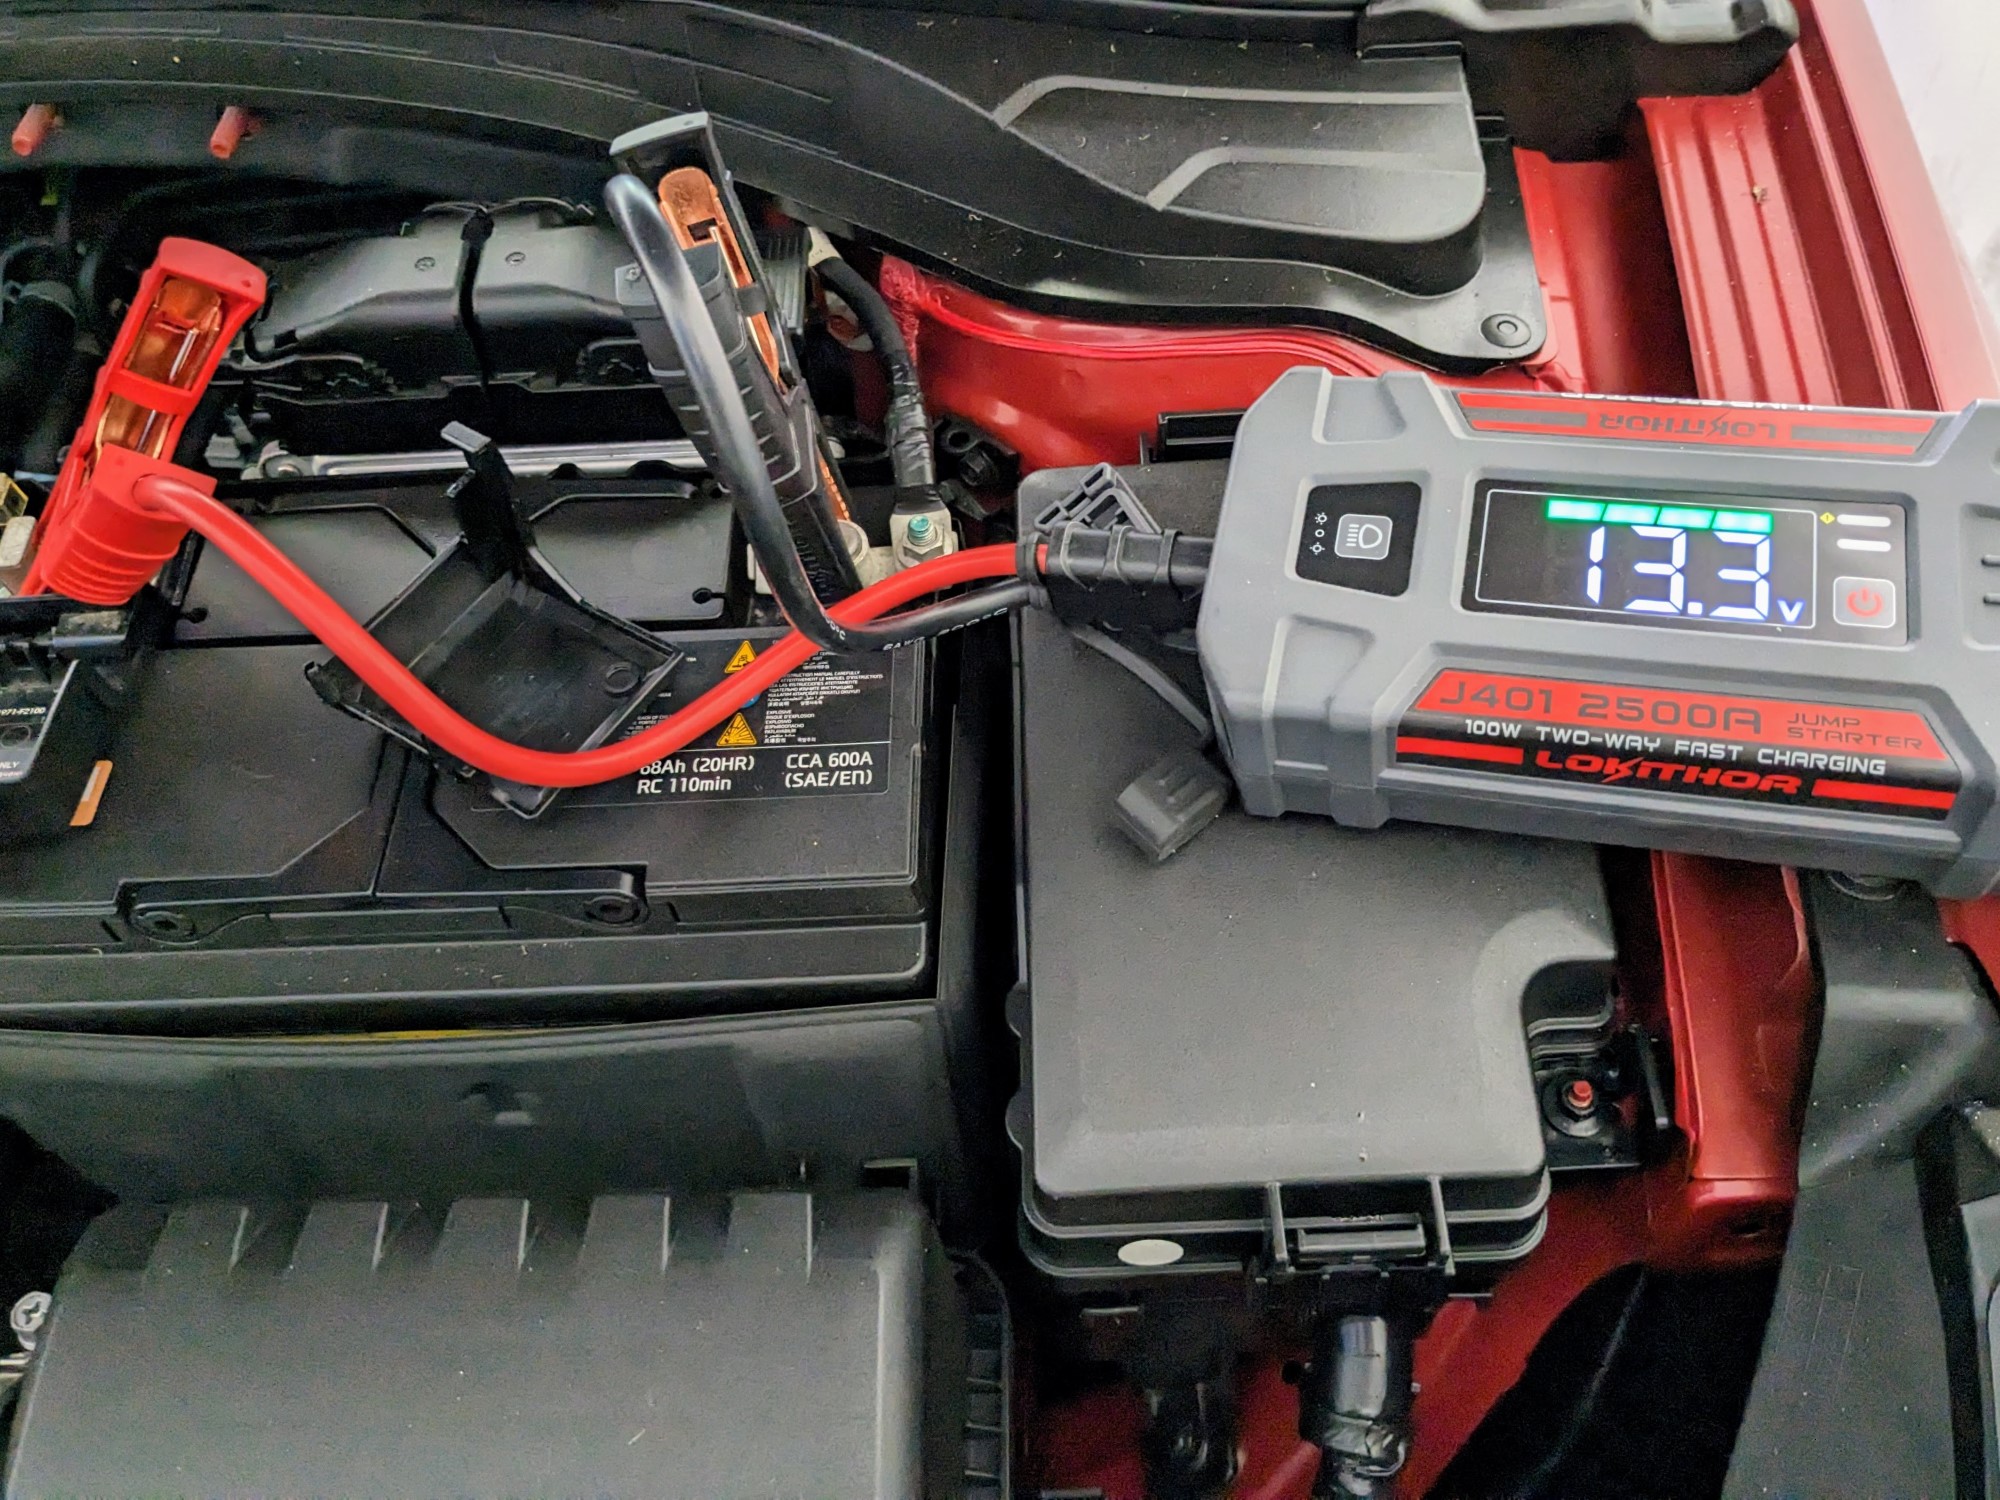 Lokithor J401 portable jump starter with leads connected to car battery. 13.3v measurement visible on display.